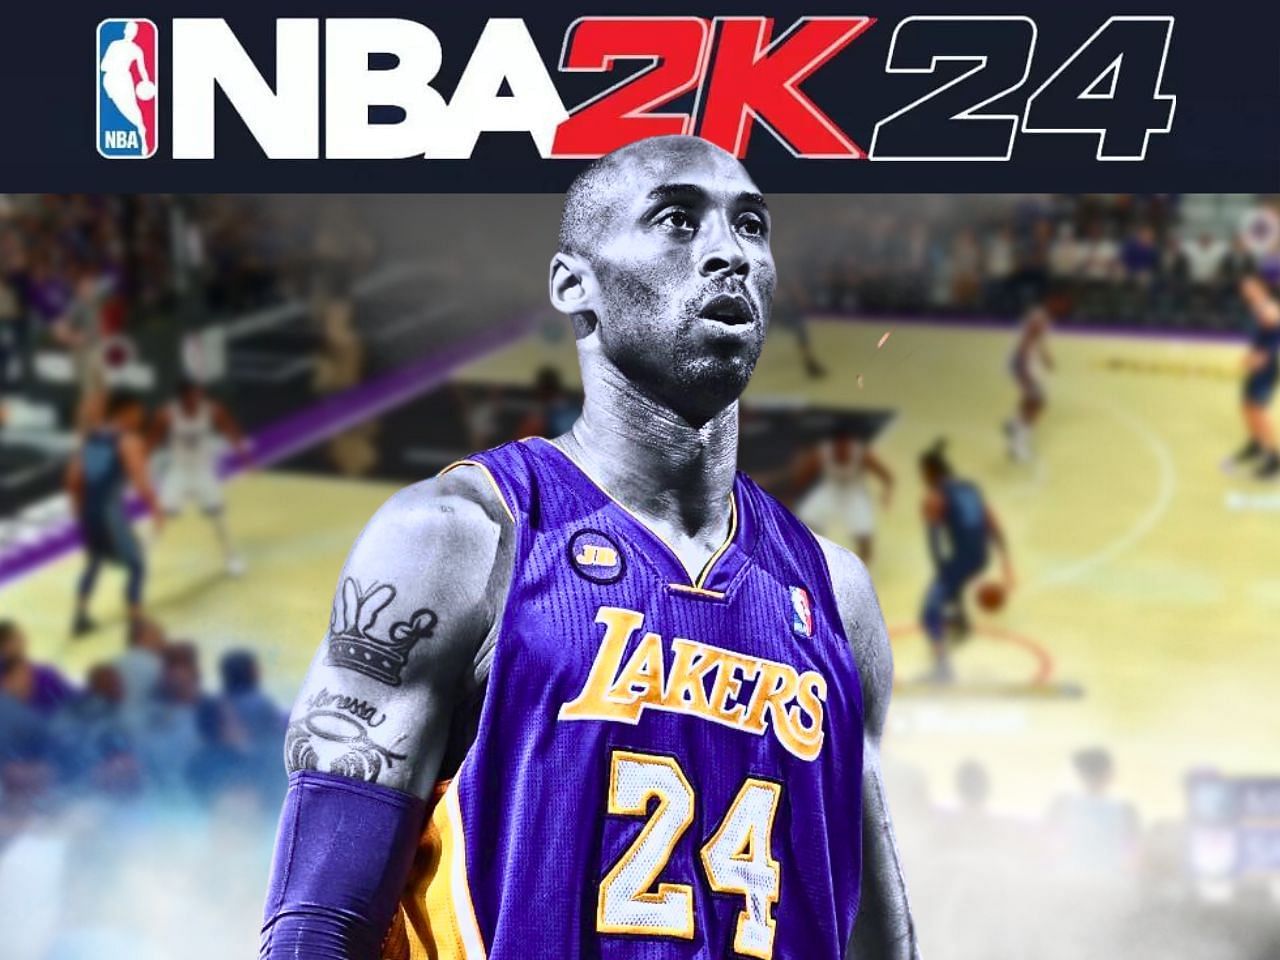 NBA 2k24 to feature Kobe Bryant on cover of latest edition of the game